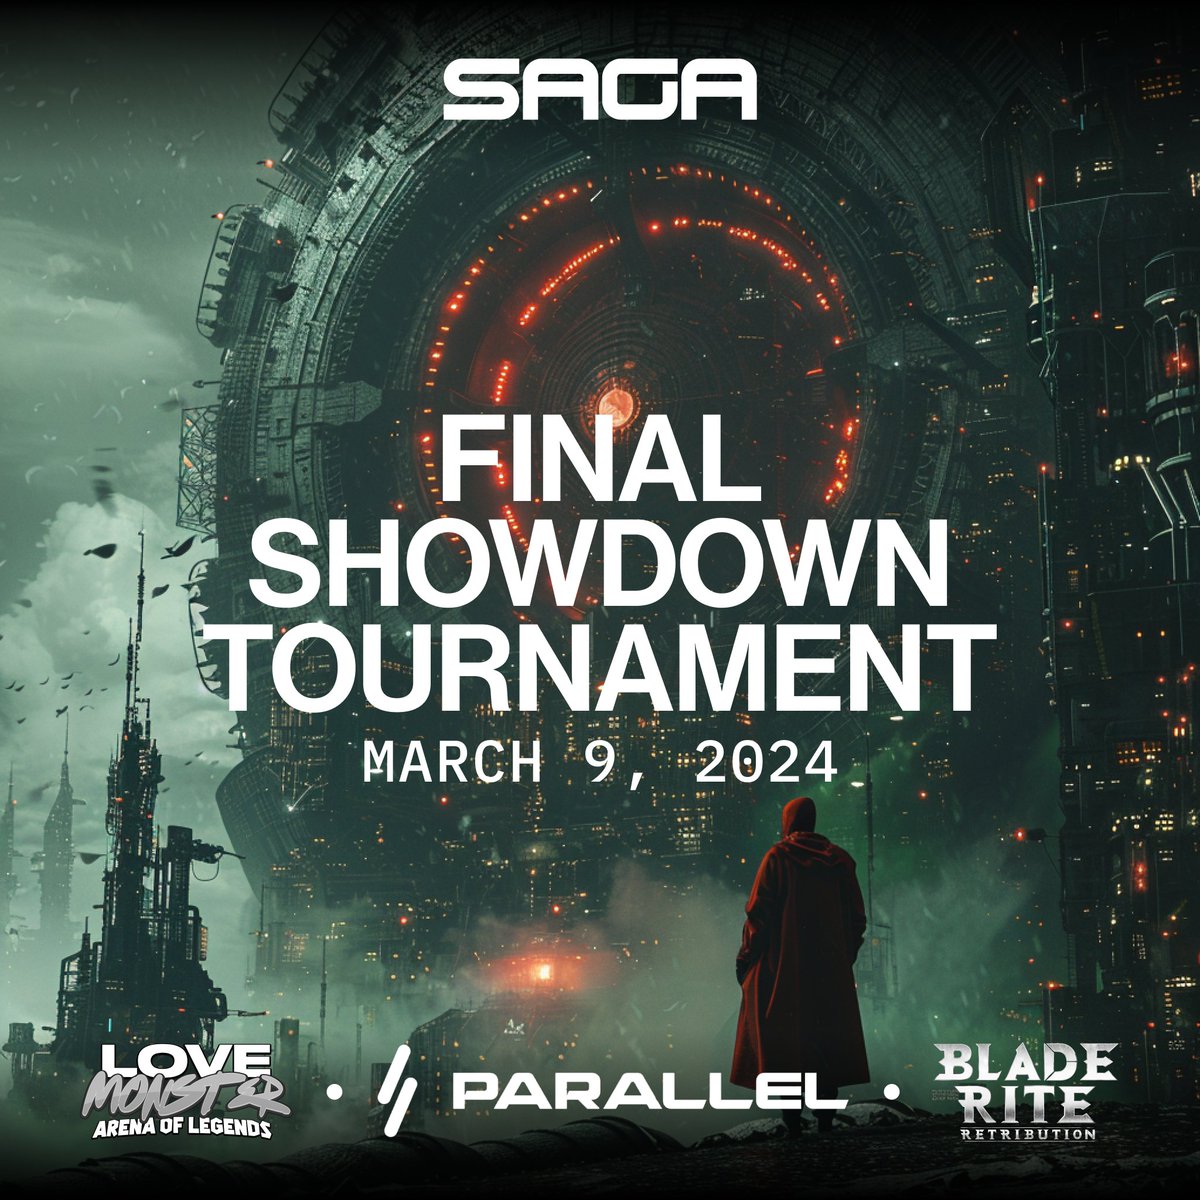 Prepare for the final showdown. This Saturday (3.9) we kick off the final event in our Saga Tournament series! The weekend’s roster features powerhouse titles @paralleltcg, @blade_rite, and @PlayLoveMonster , representing Ethereum, Solana, and Avalanche communities. The event